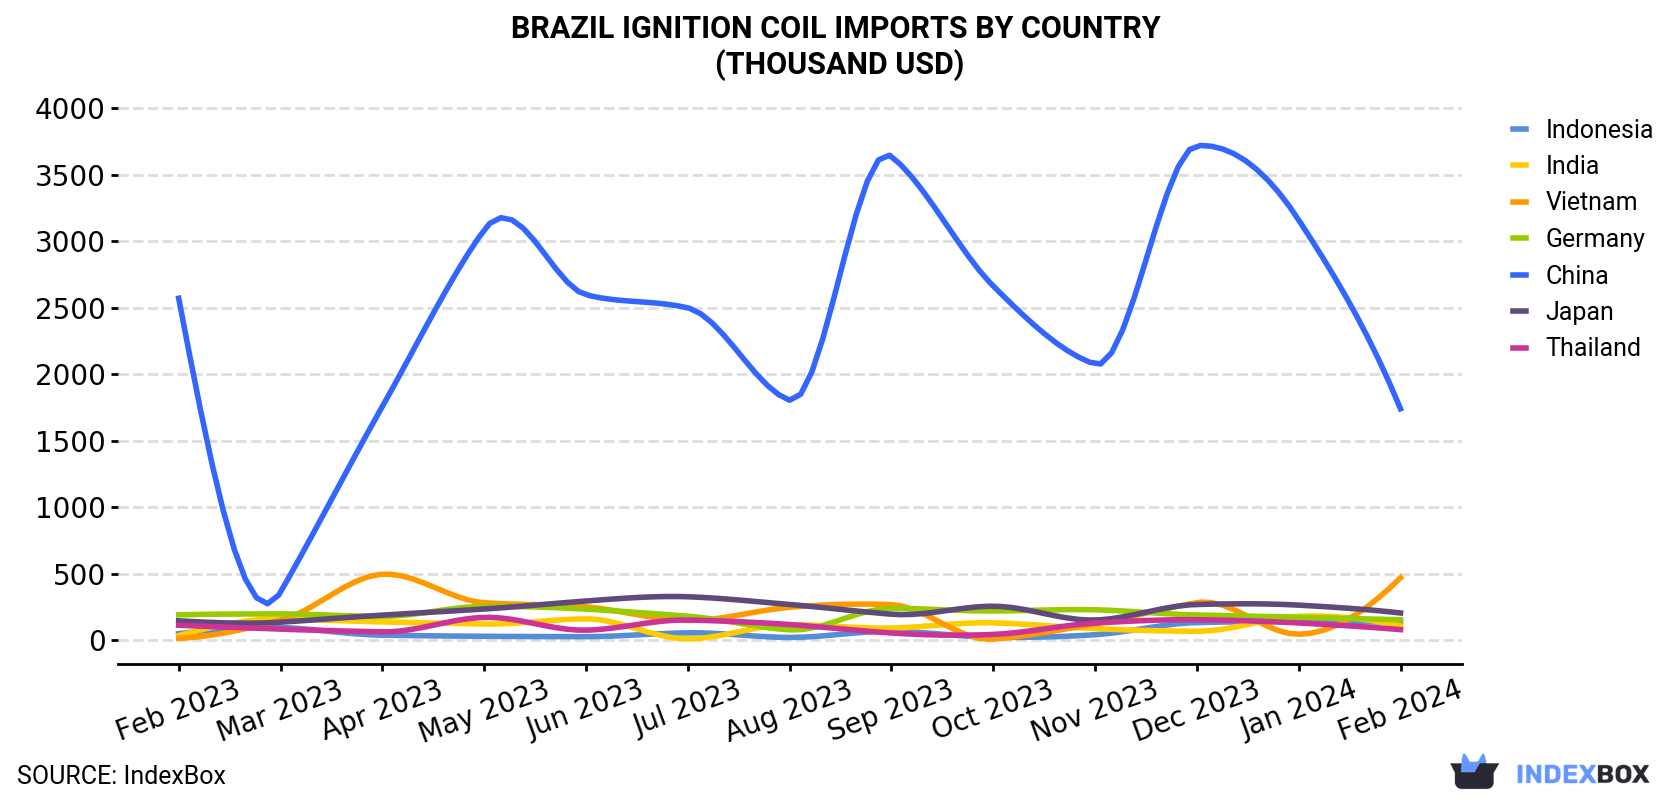 Brazil Ignition Coil Imports By Country (Thousand USD)